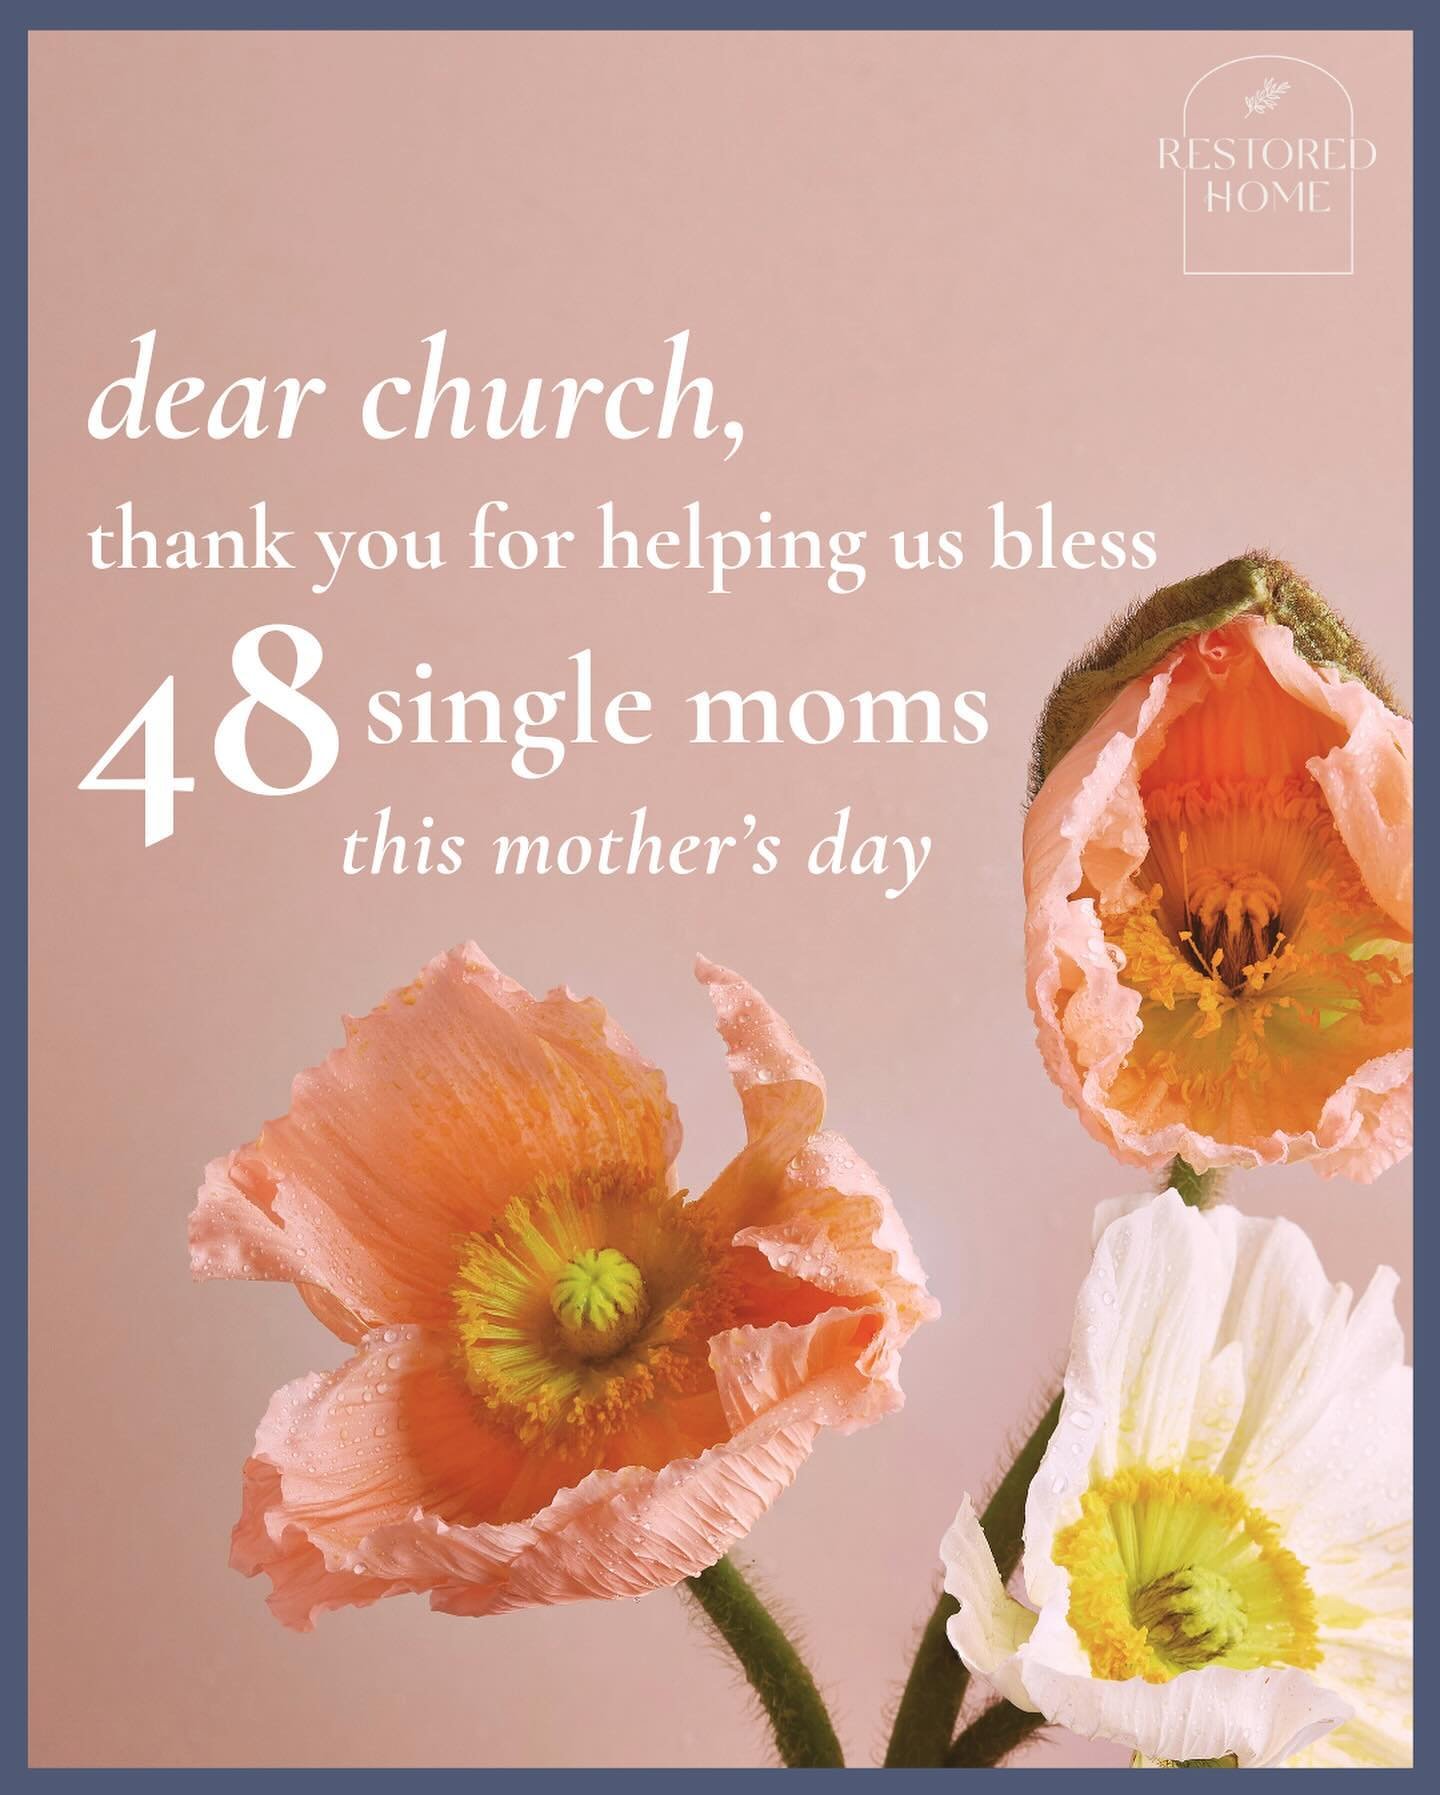 🧡🌸4 8  S I N G L E  M O M S 🌸🧡
Dear Church, Thank you for helping us bless 48 single moms this Mother&rsquo;s Day!

Thank you for seeing, loving, and caring for these precious women so well. Thank you for reminding them that this community is wit